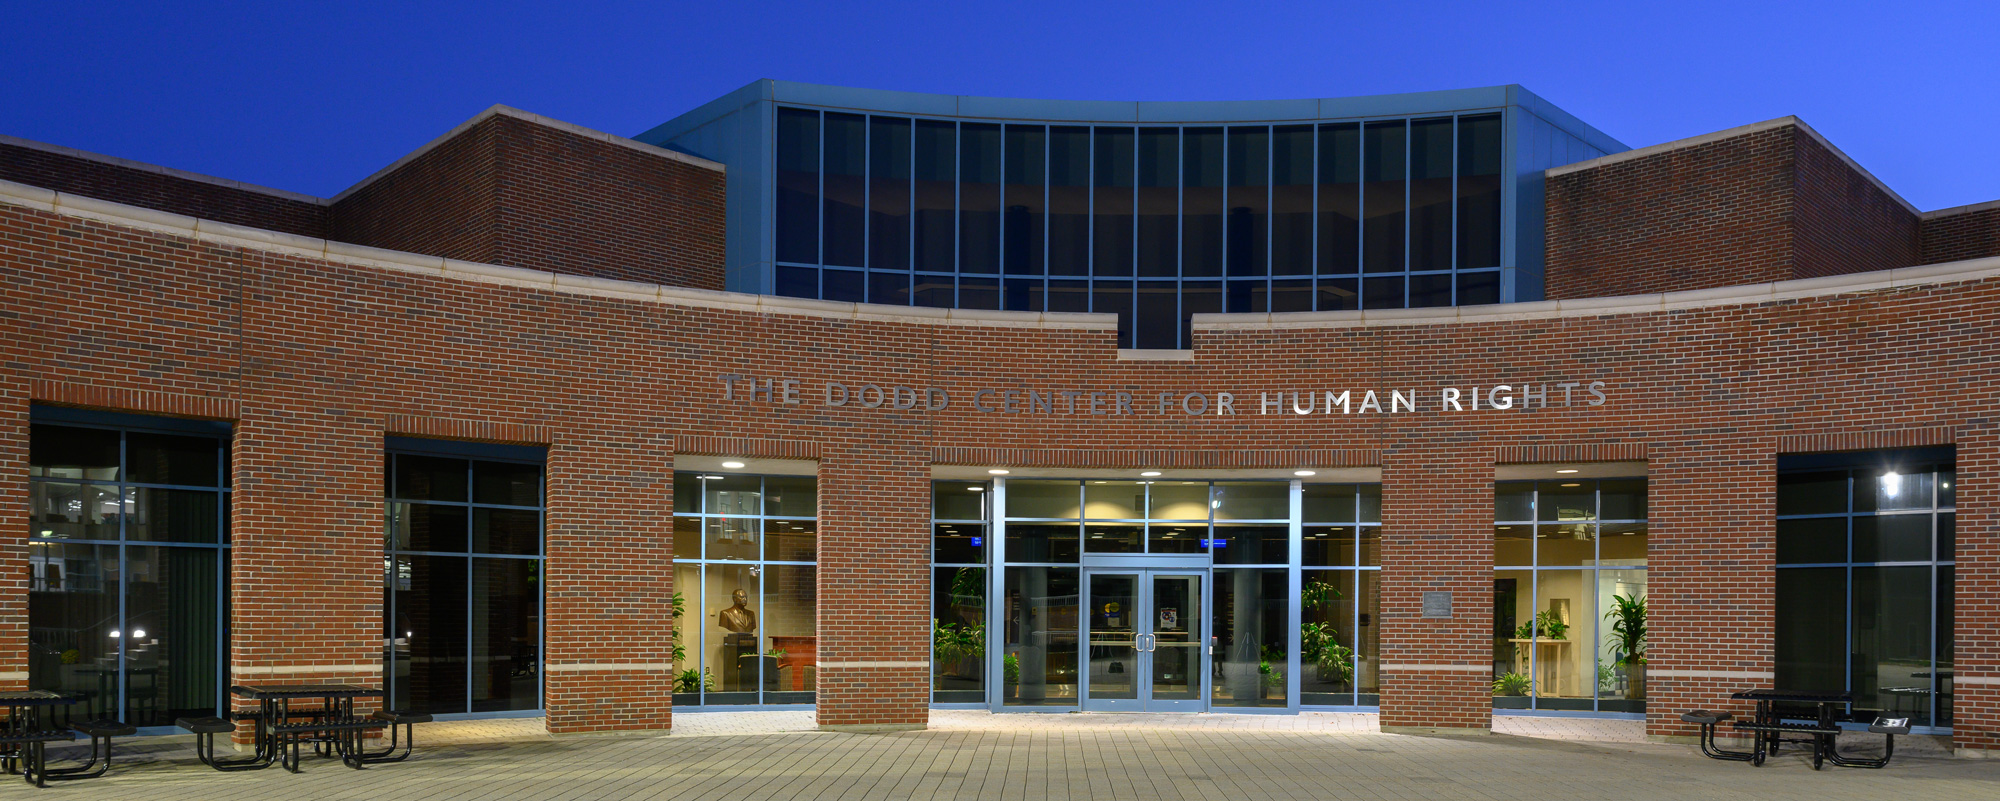 The Dodd Center for Human Rights building